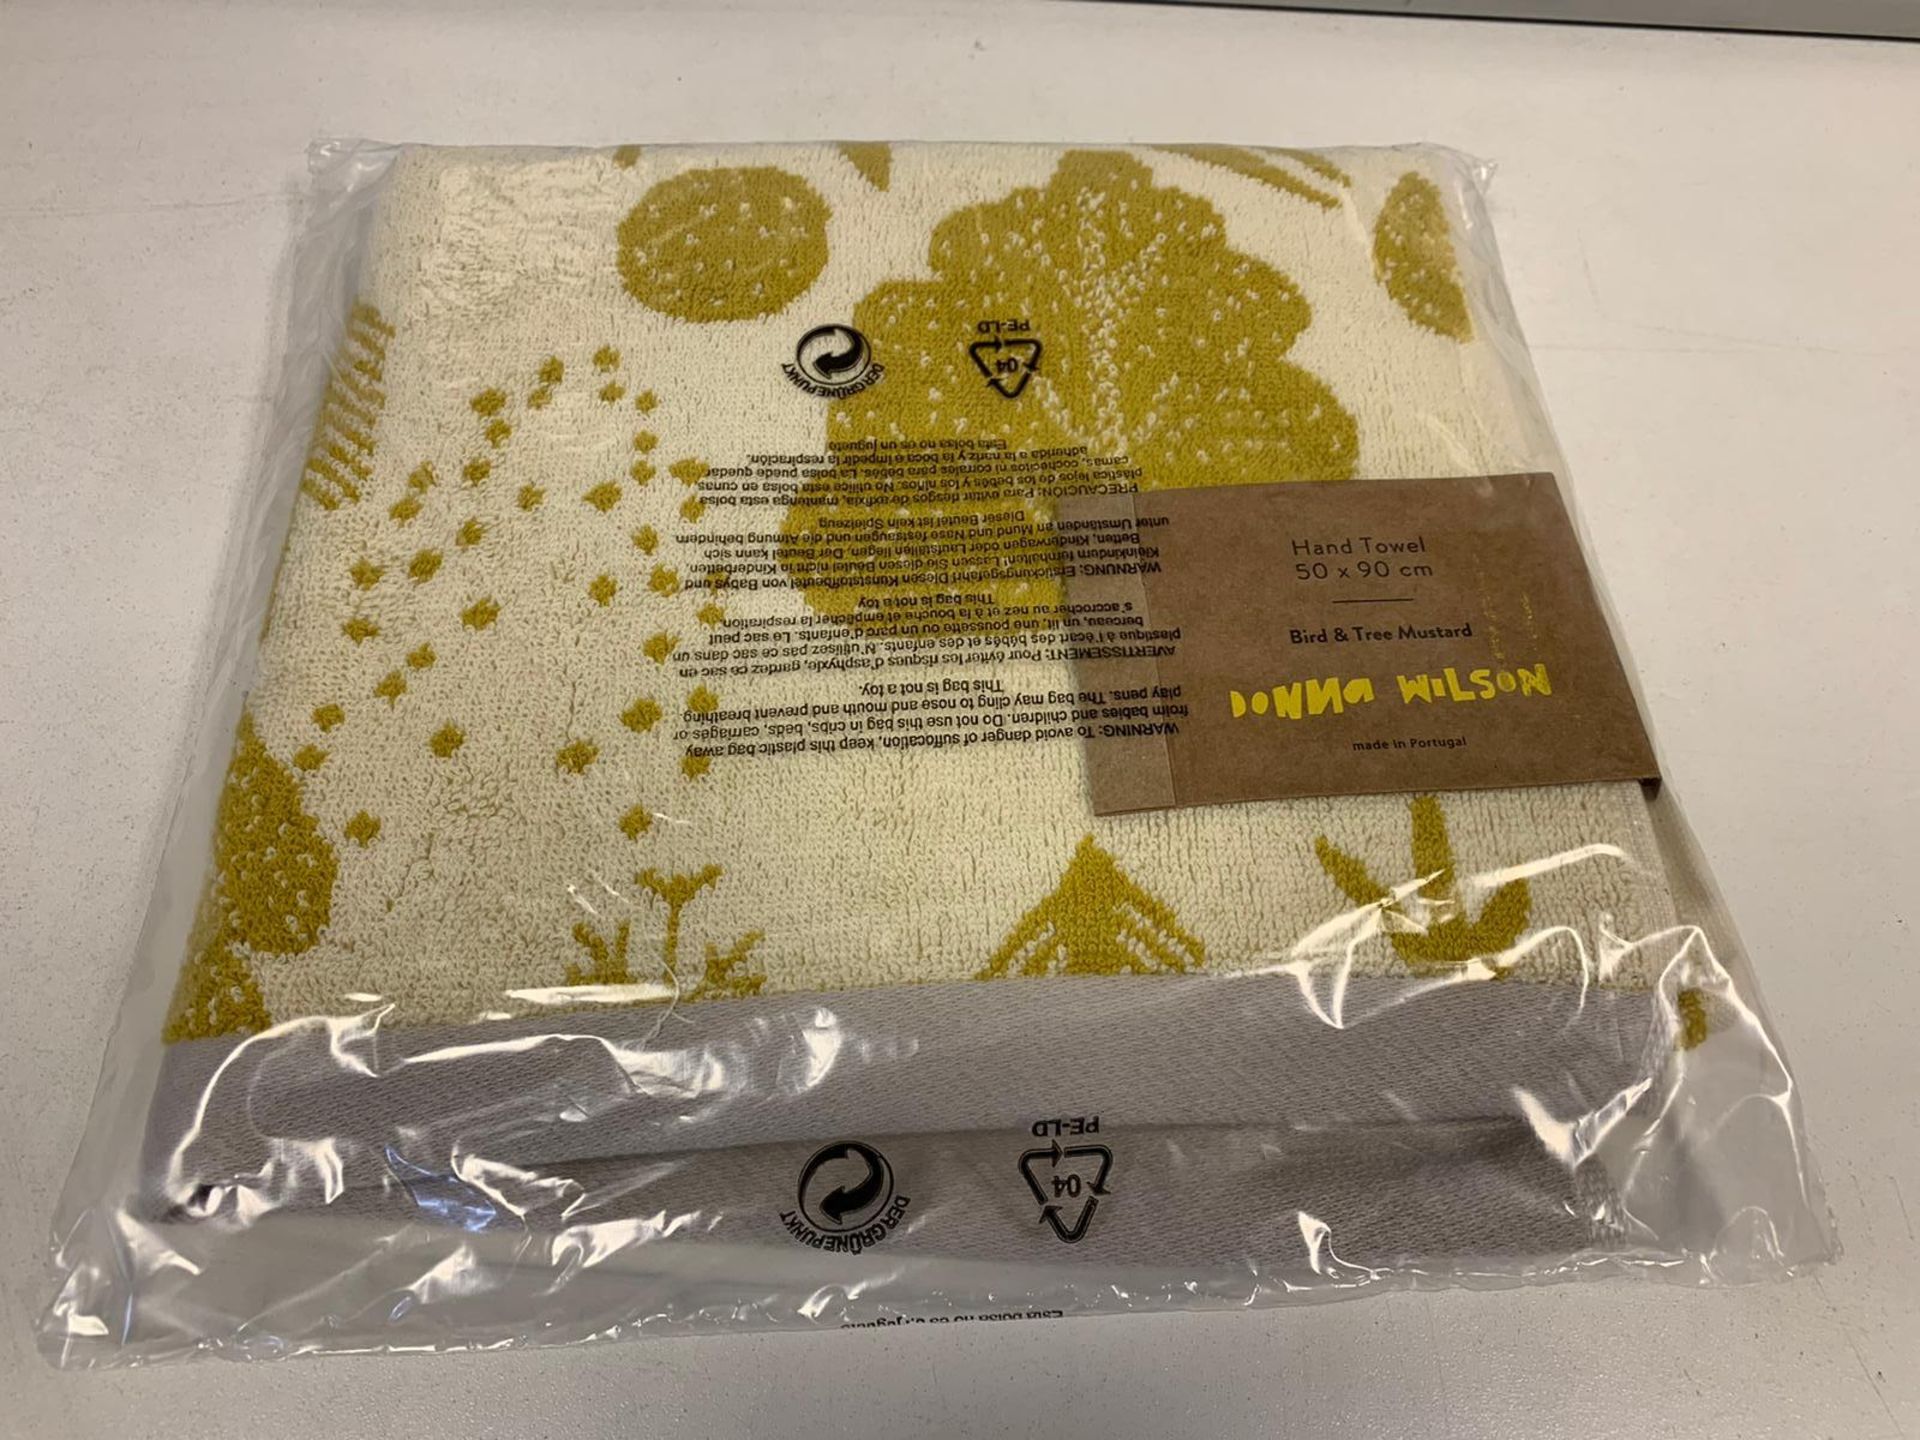 30 X BRAND NEW BOXED DONNA WILSON BIRD AND TREE MUSTARD HAND TOWELS 50 X 90CM RRP £14 EACH